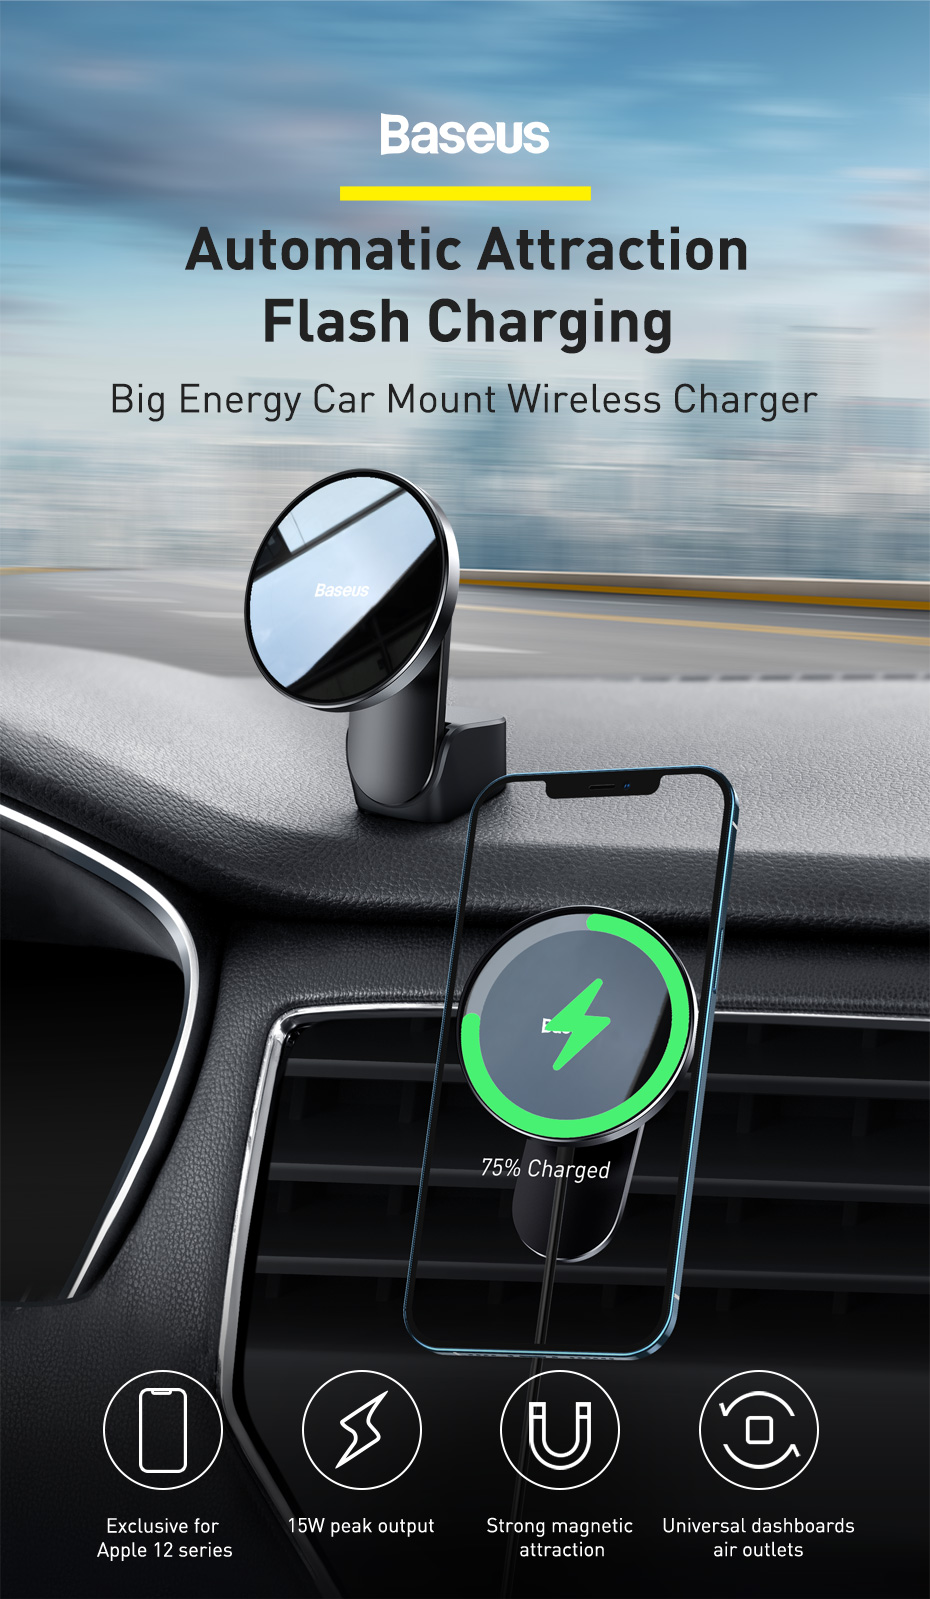 Baseus-Magnetic-15W-Qi-Wireless-Charger-Automatic-Clamping-Air-Vent-Dashboard-Car-Phone-Holder-Car-M-1835357-1